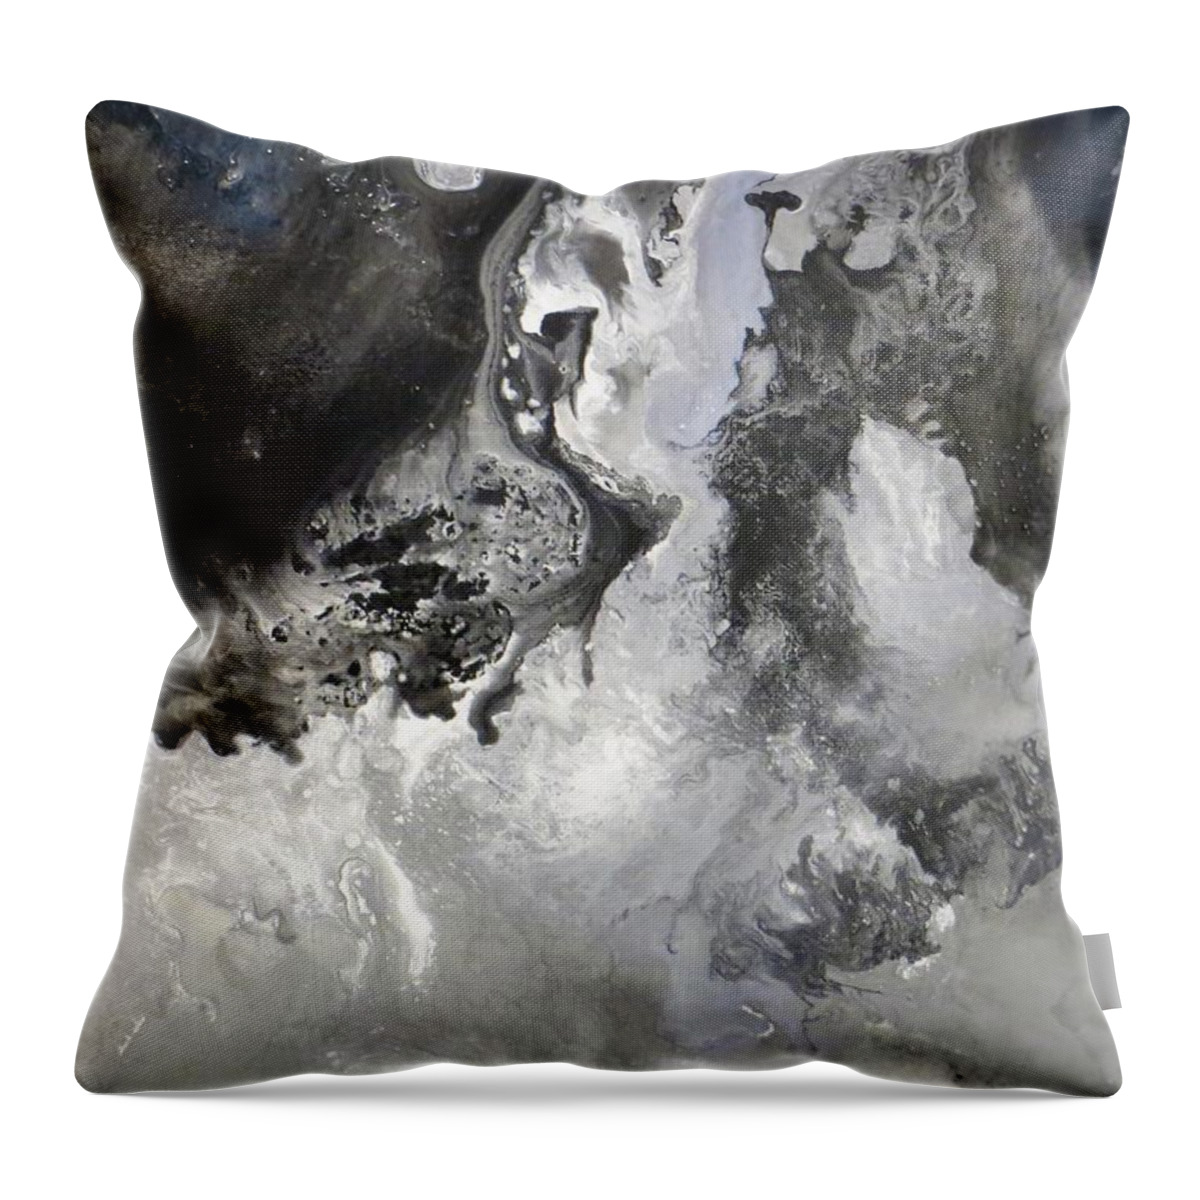 Abstract Throw Pillow featuring the painting Bodacious by Soraya Silvestri